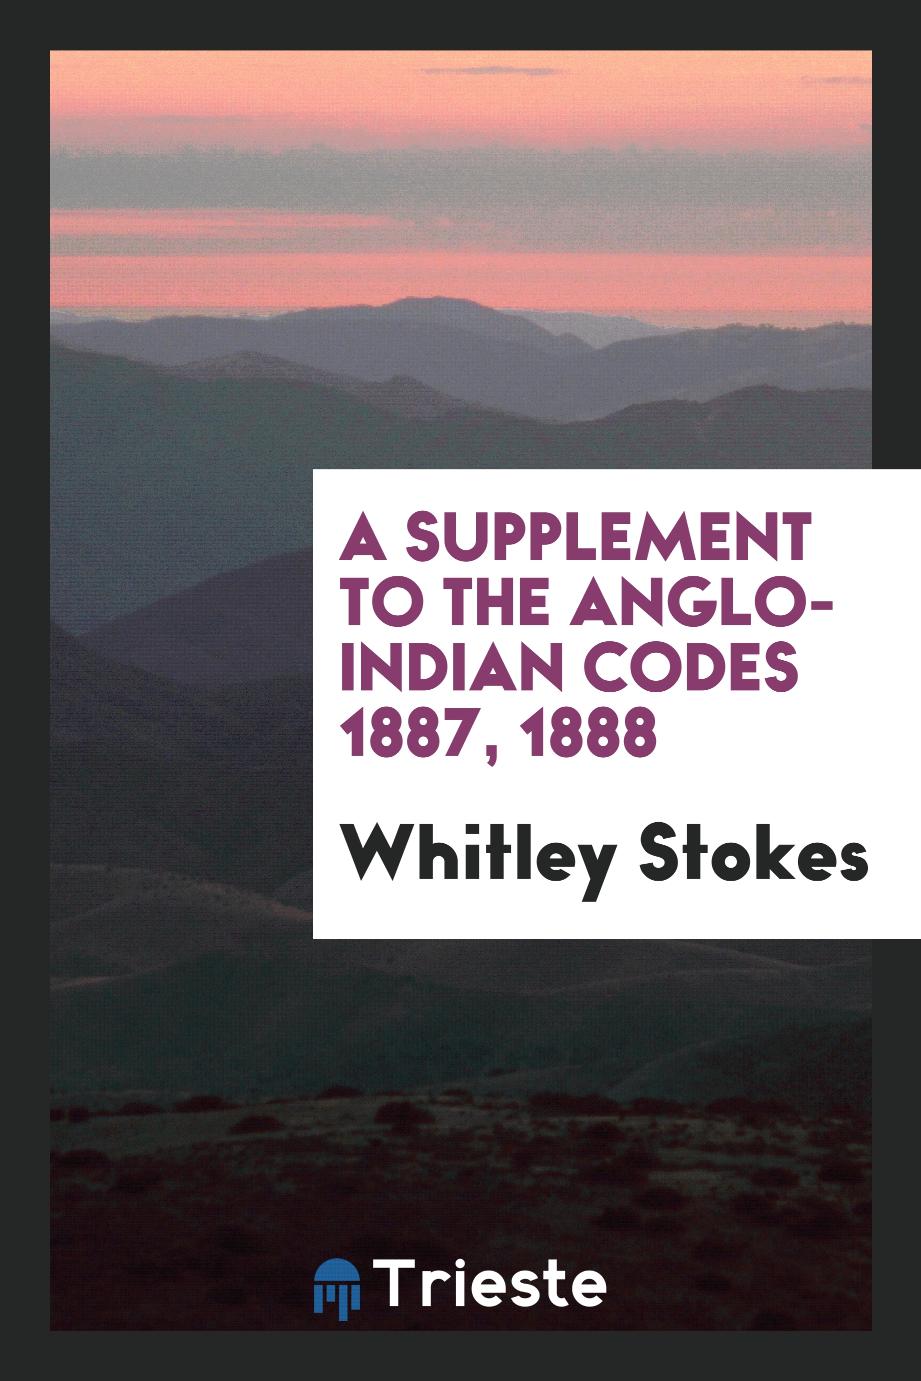 A Supplement to The Anglo-Indian Codes 1887, 1888